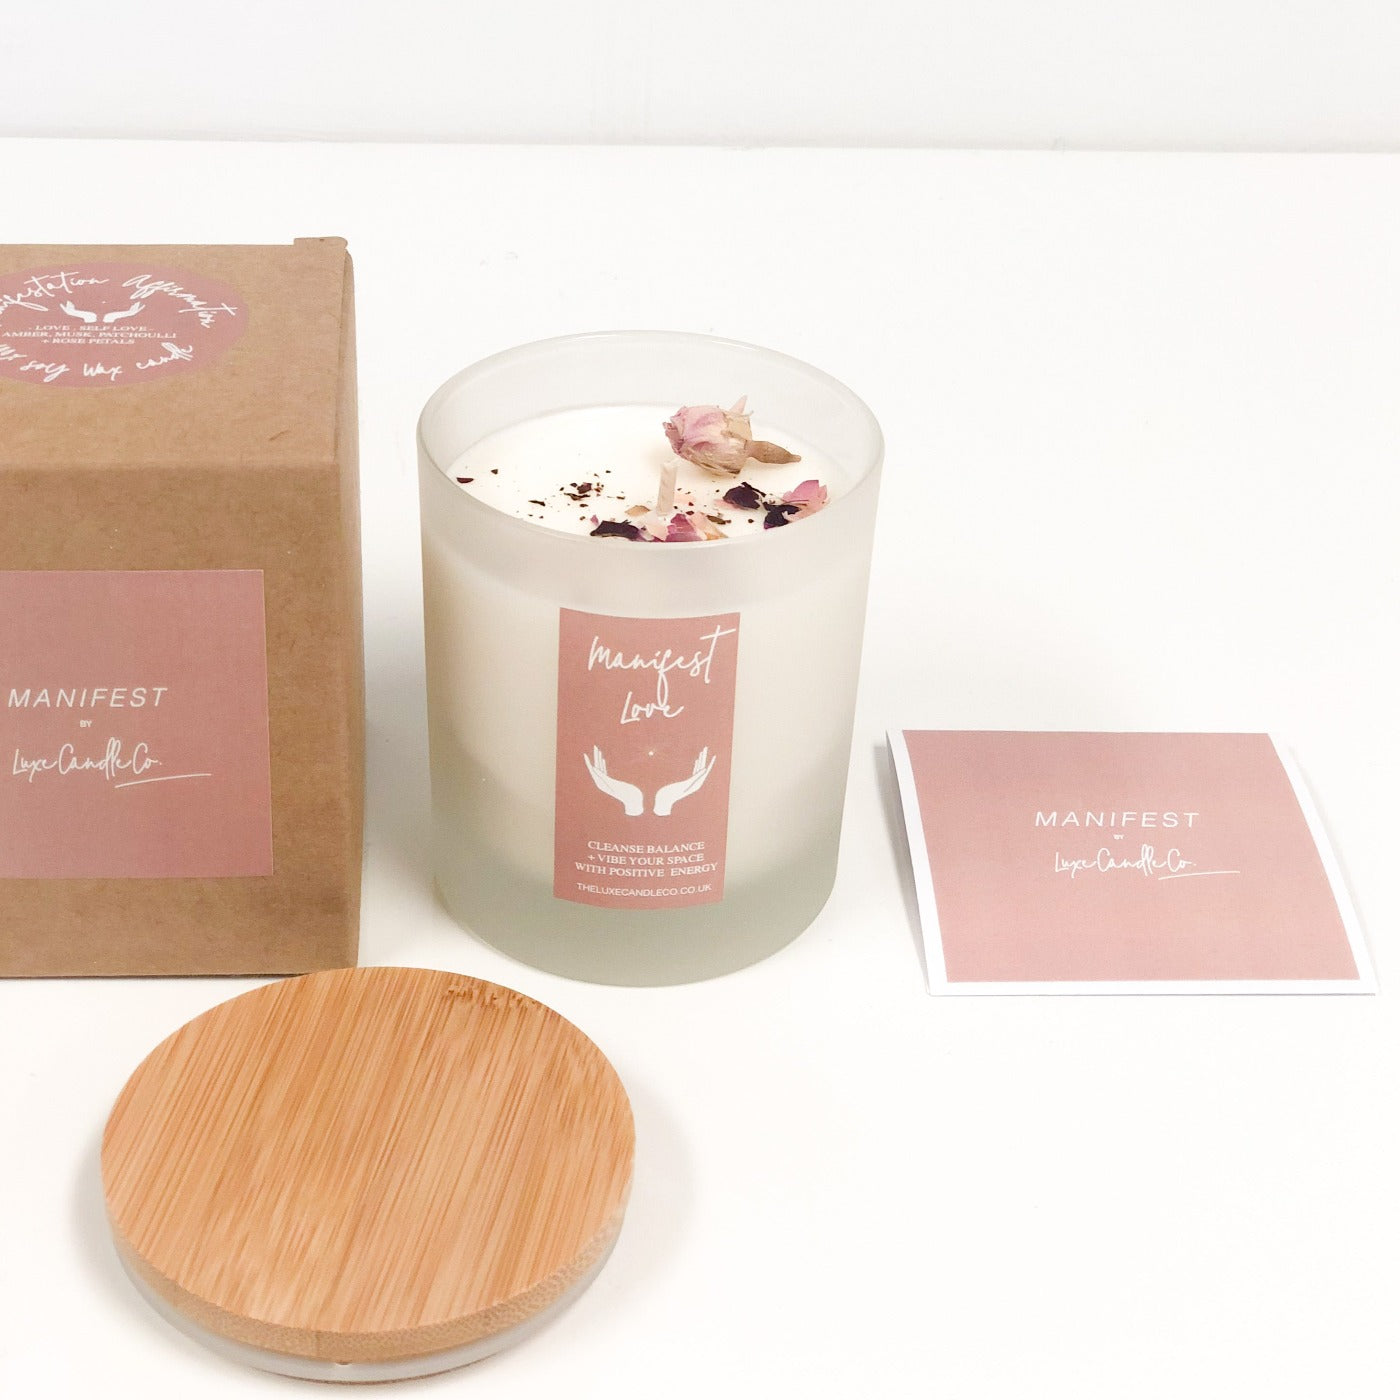 Manifest Love Candle | Wellness Candle to manifest self love, emotions, confidence, friendship | The Luxe Candle Co